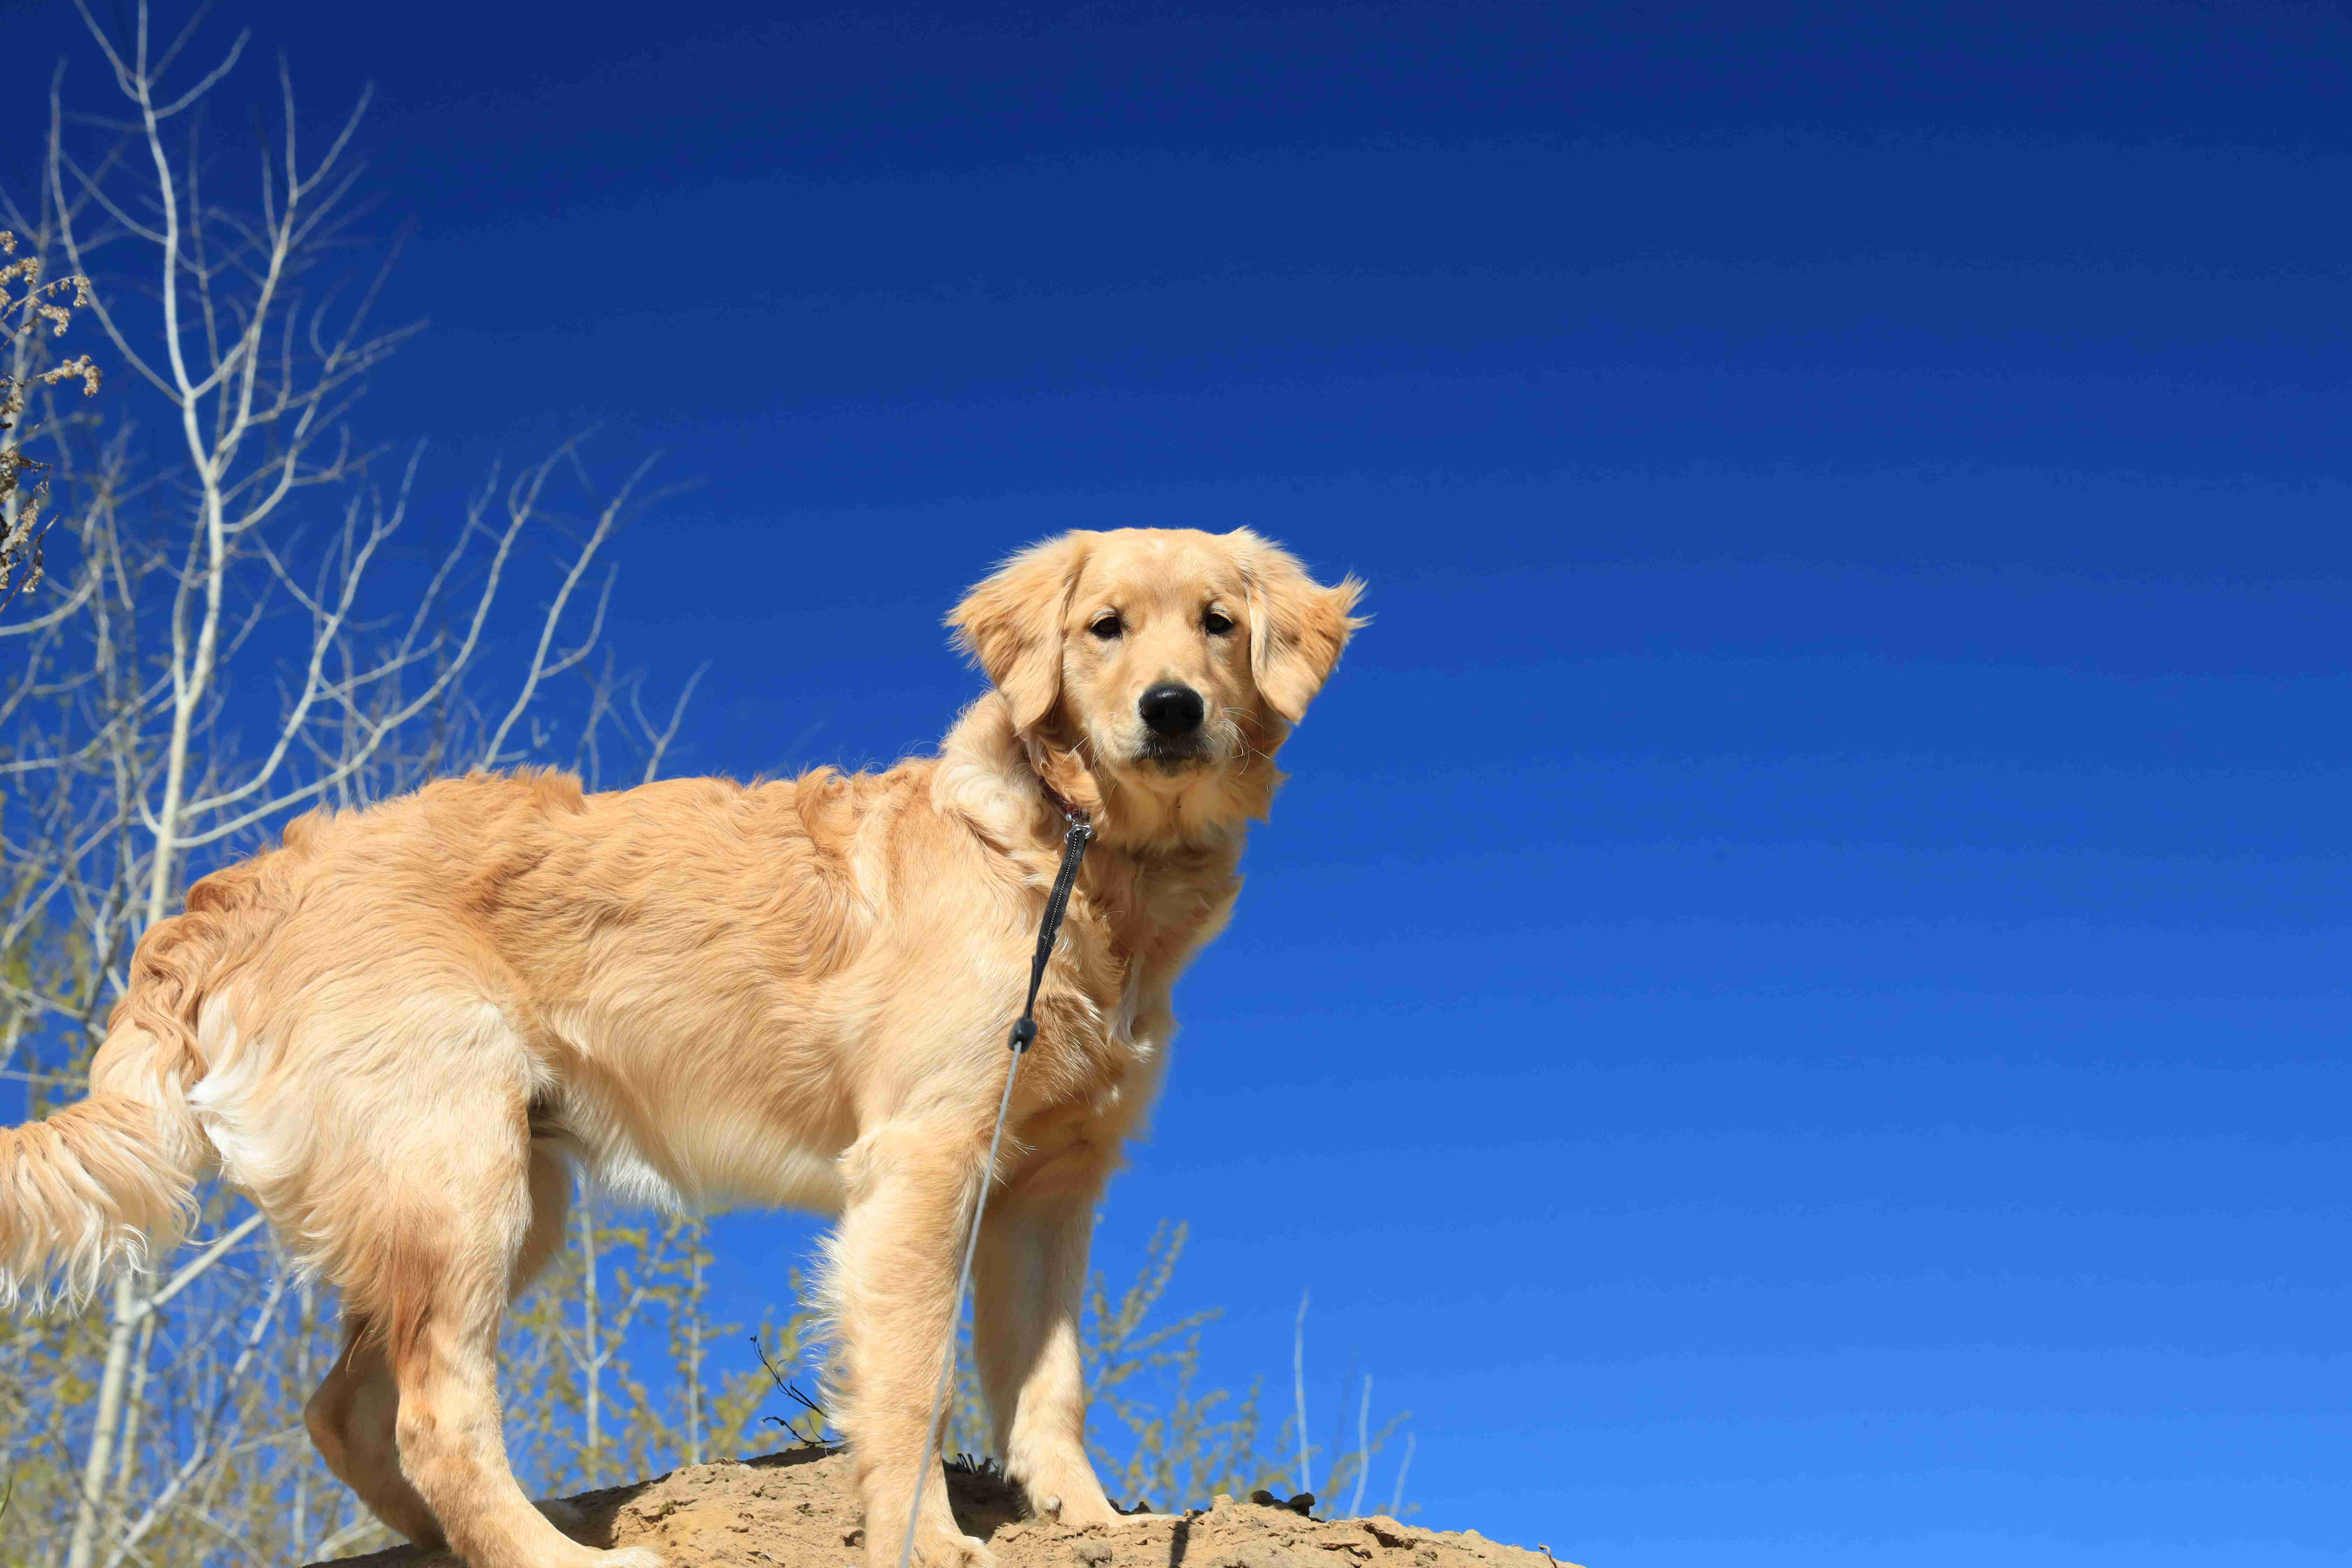 How can I prevent my Golden Retriever from digging in the yard?